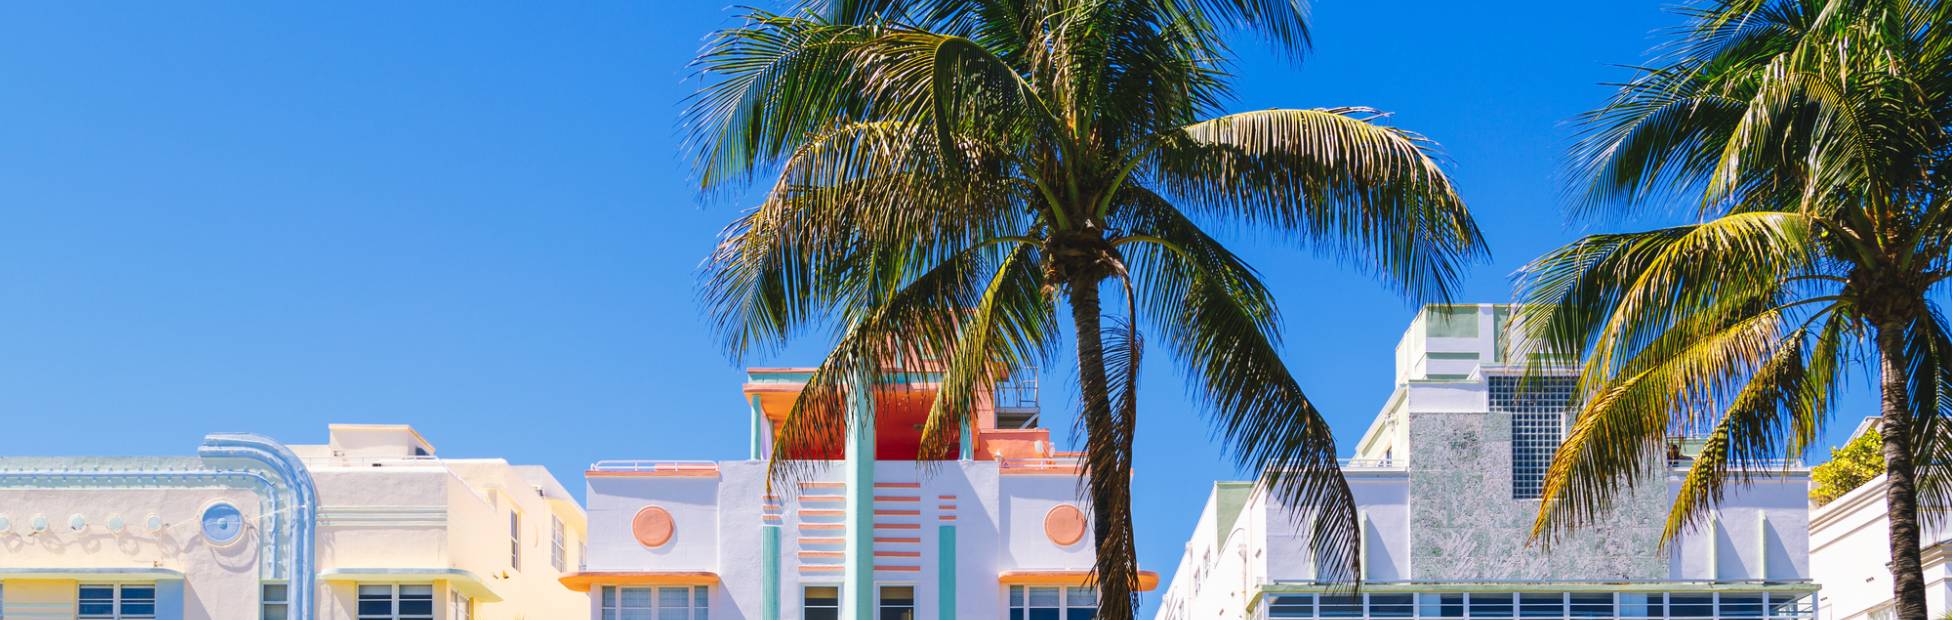 A row of colourful art deco Miami hotels with palm trees